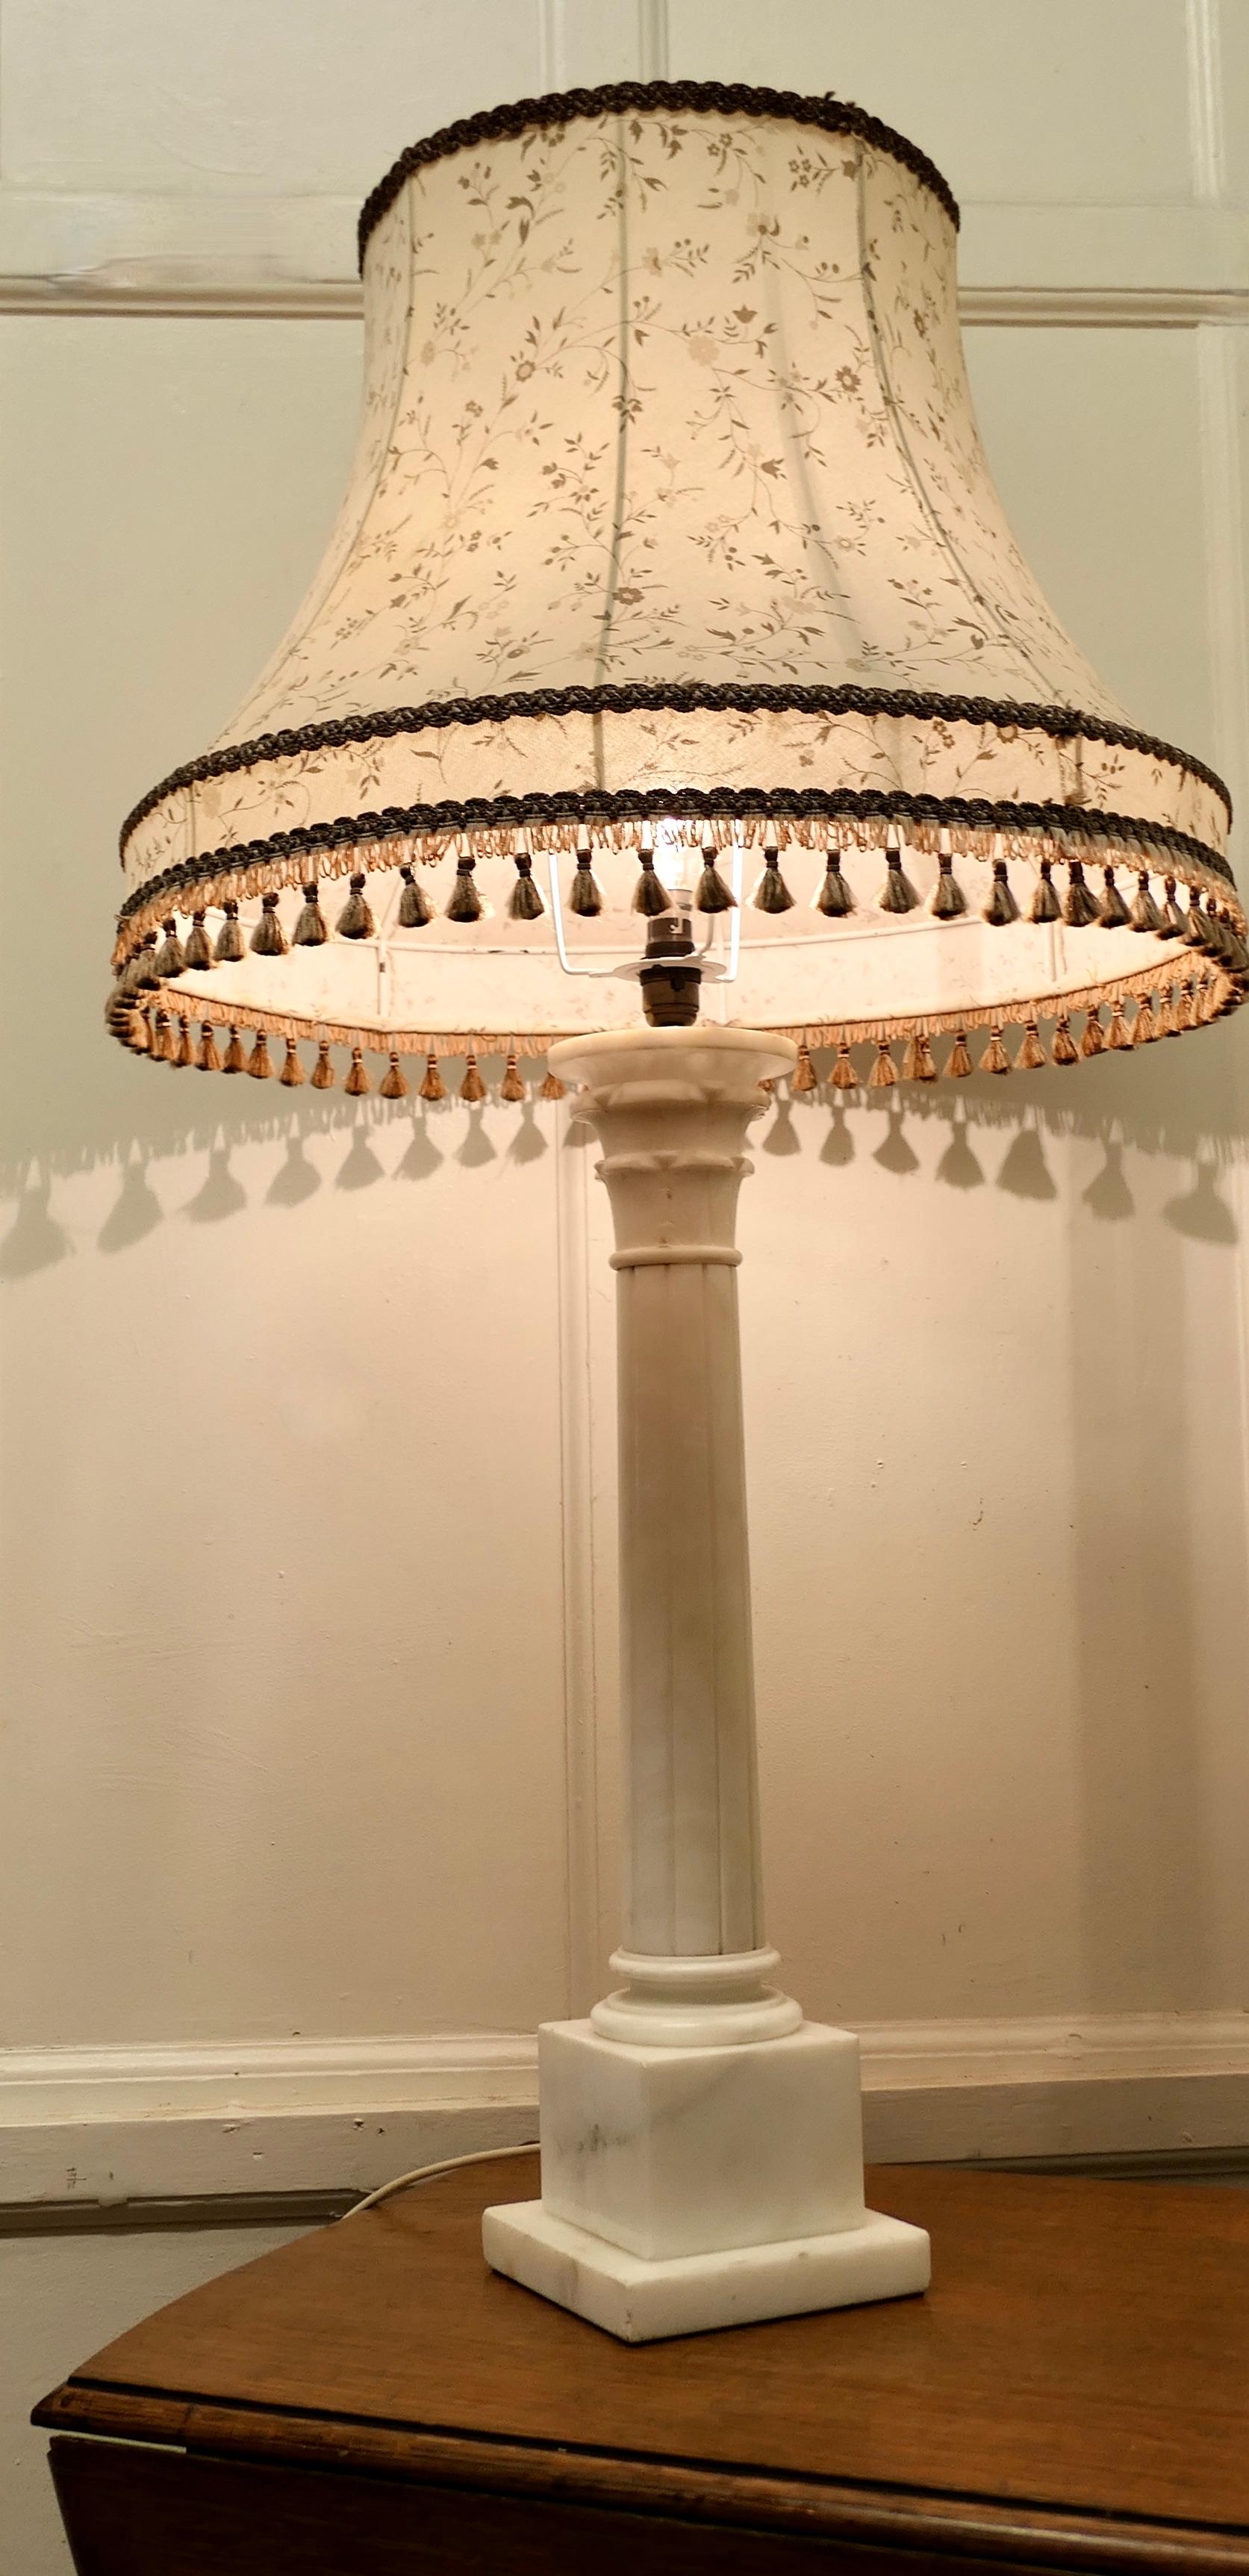 Large white marble corinthian column table lamp

This is a very heavy piece it is made in solid marble, the lamp has a single reeded marble corinthian style column with fine grey marbling it is set on a square stepped base
This is a very